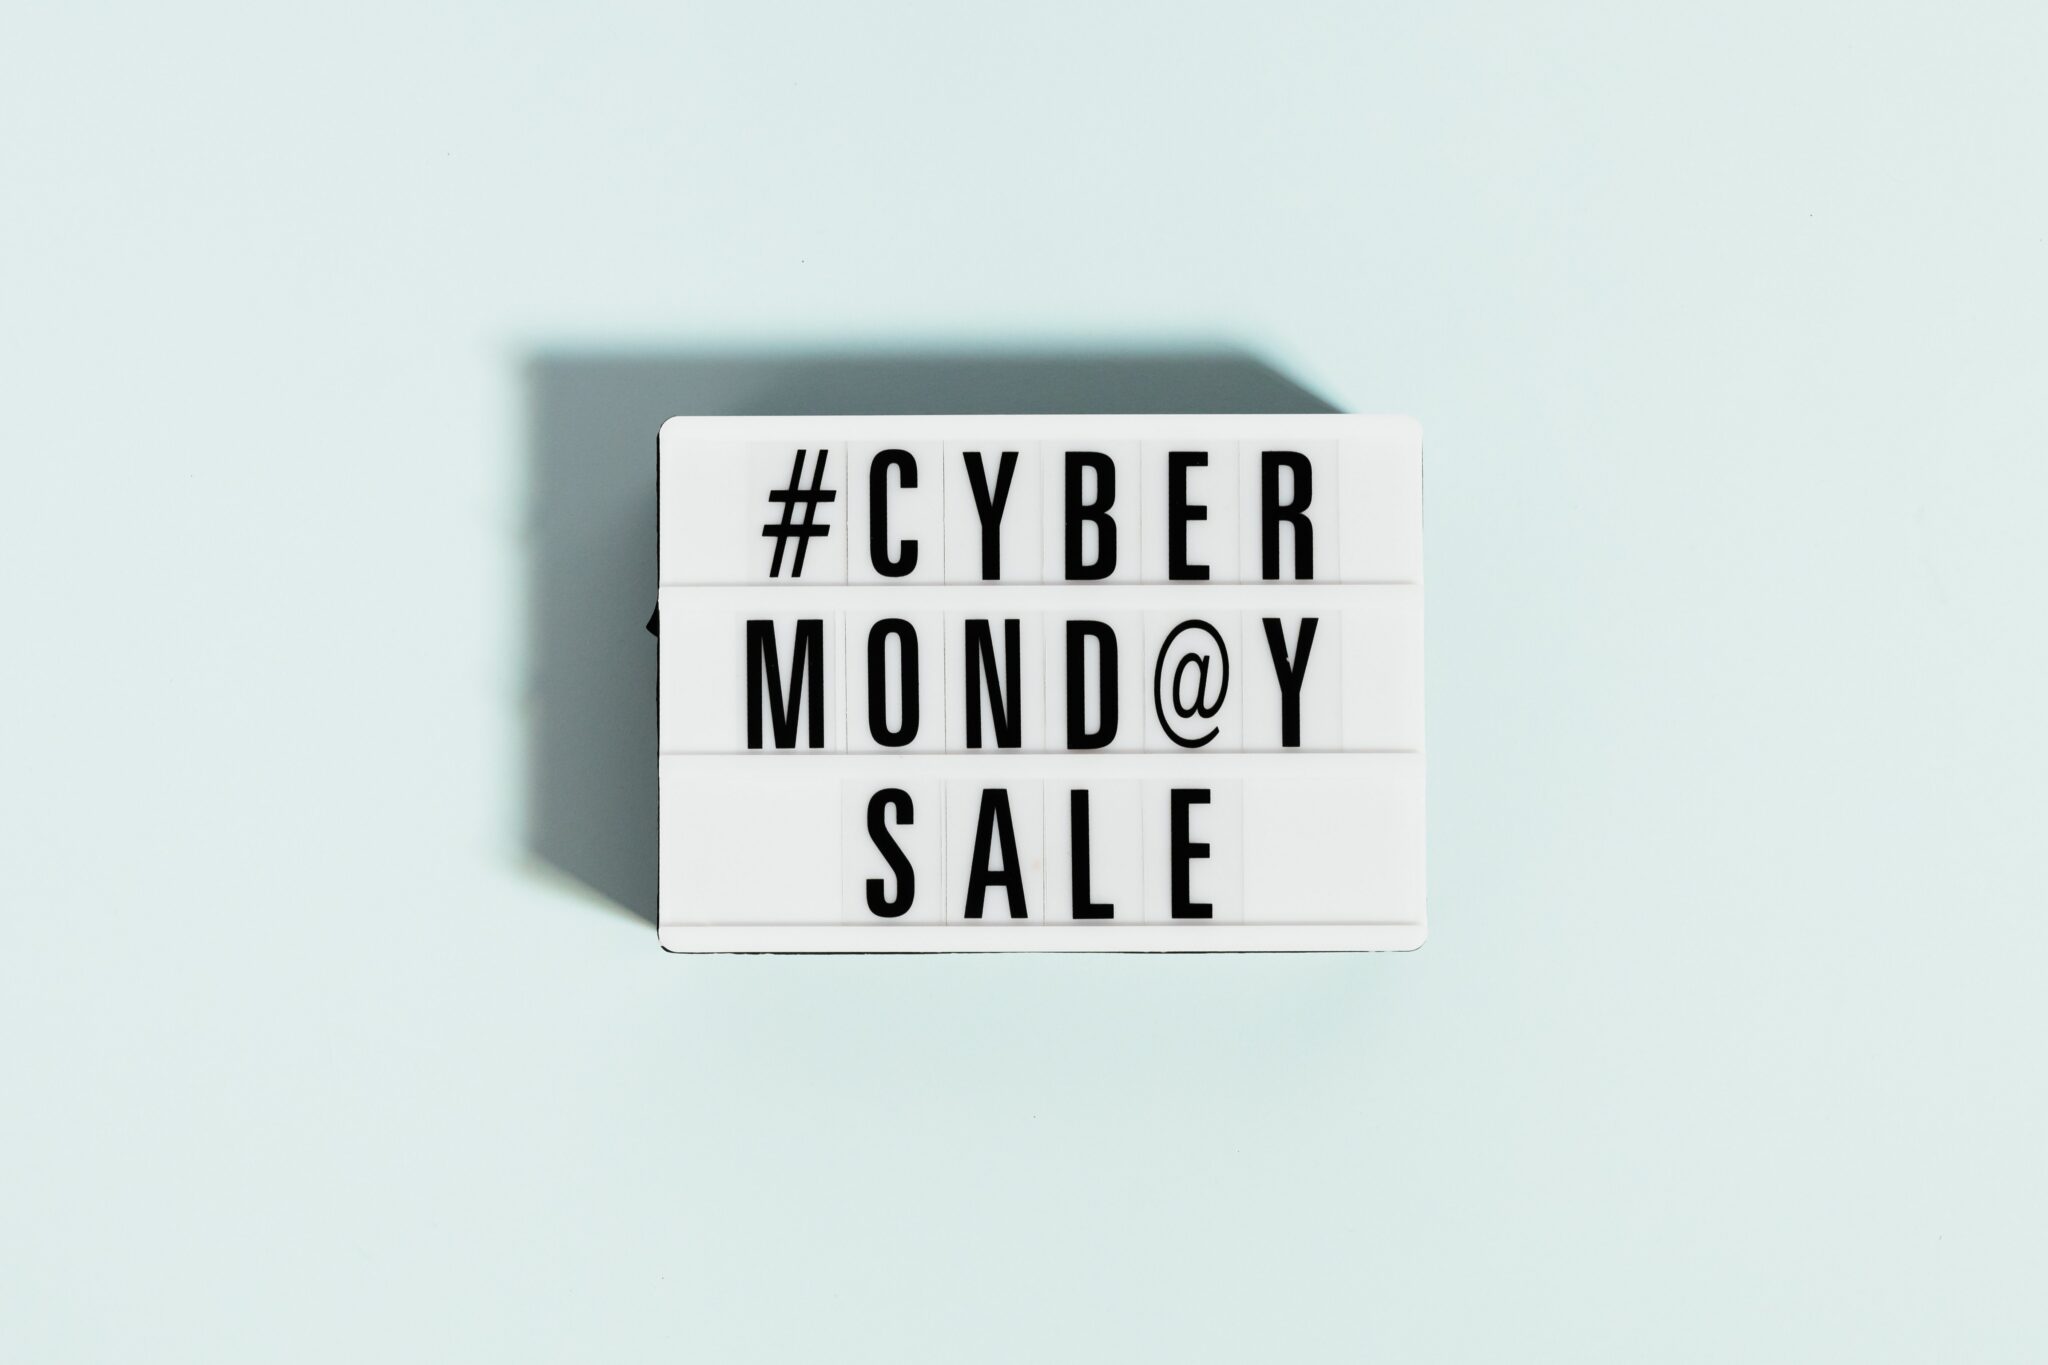 How To Conquer Cyber Monday In 2021?